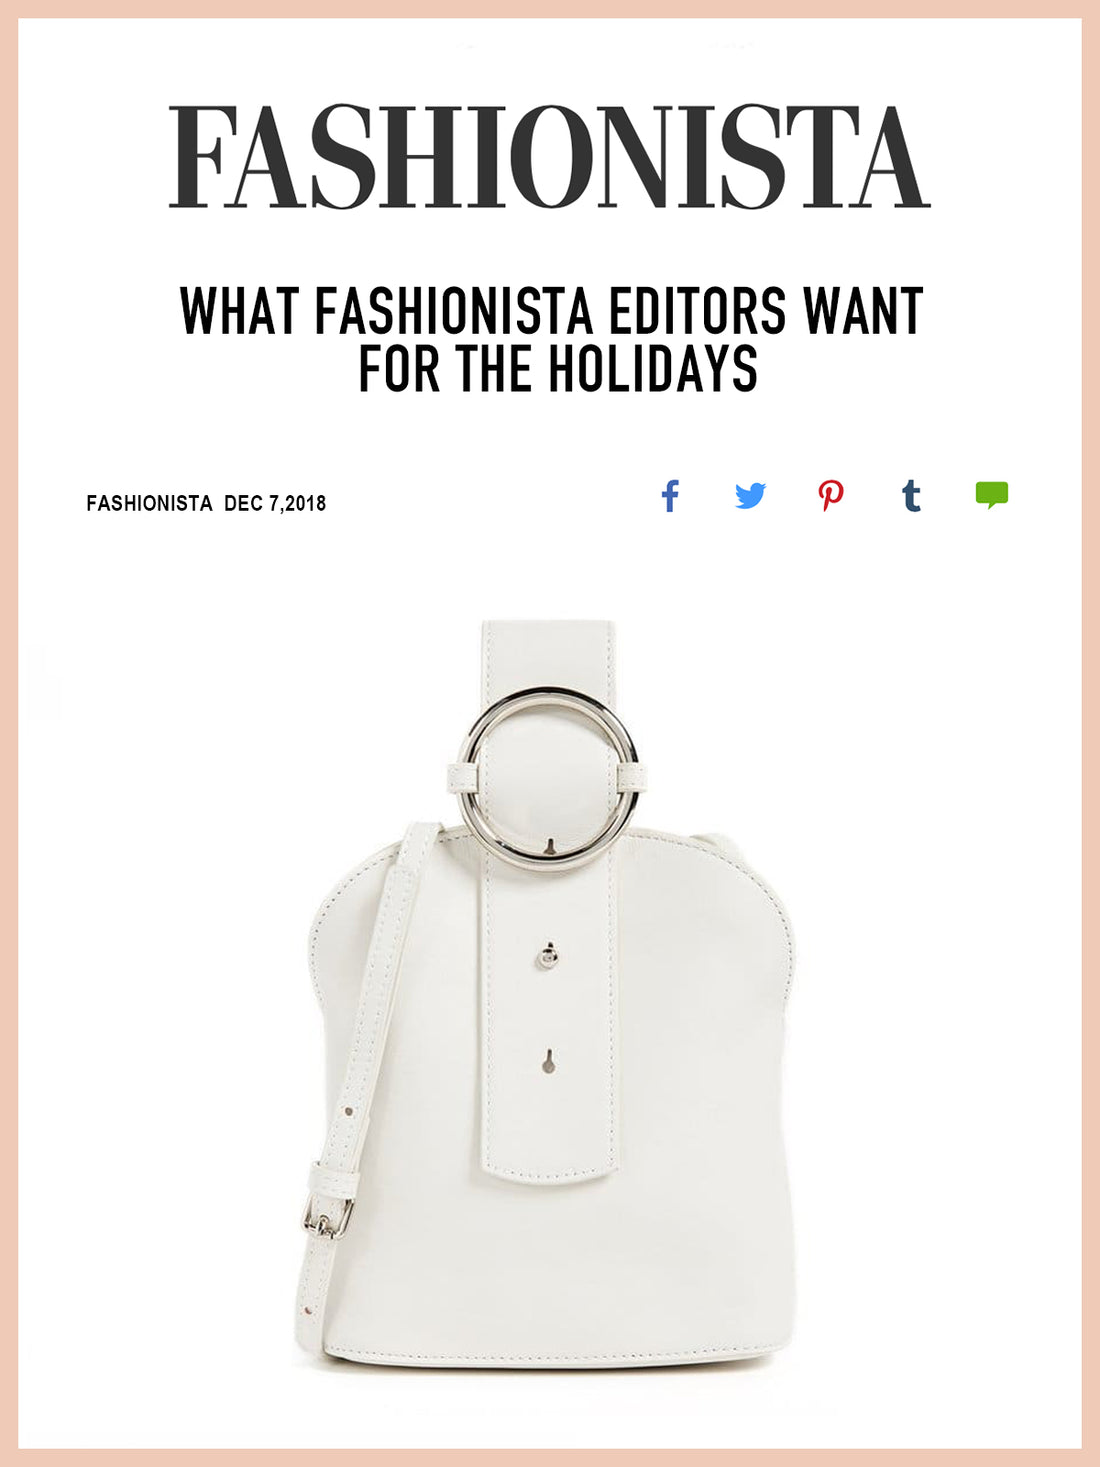 FASHIONISTA, What FASHIONISTA Editors Want For The Holidays